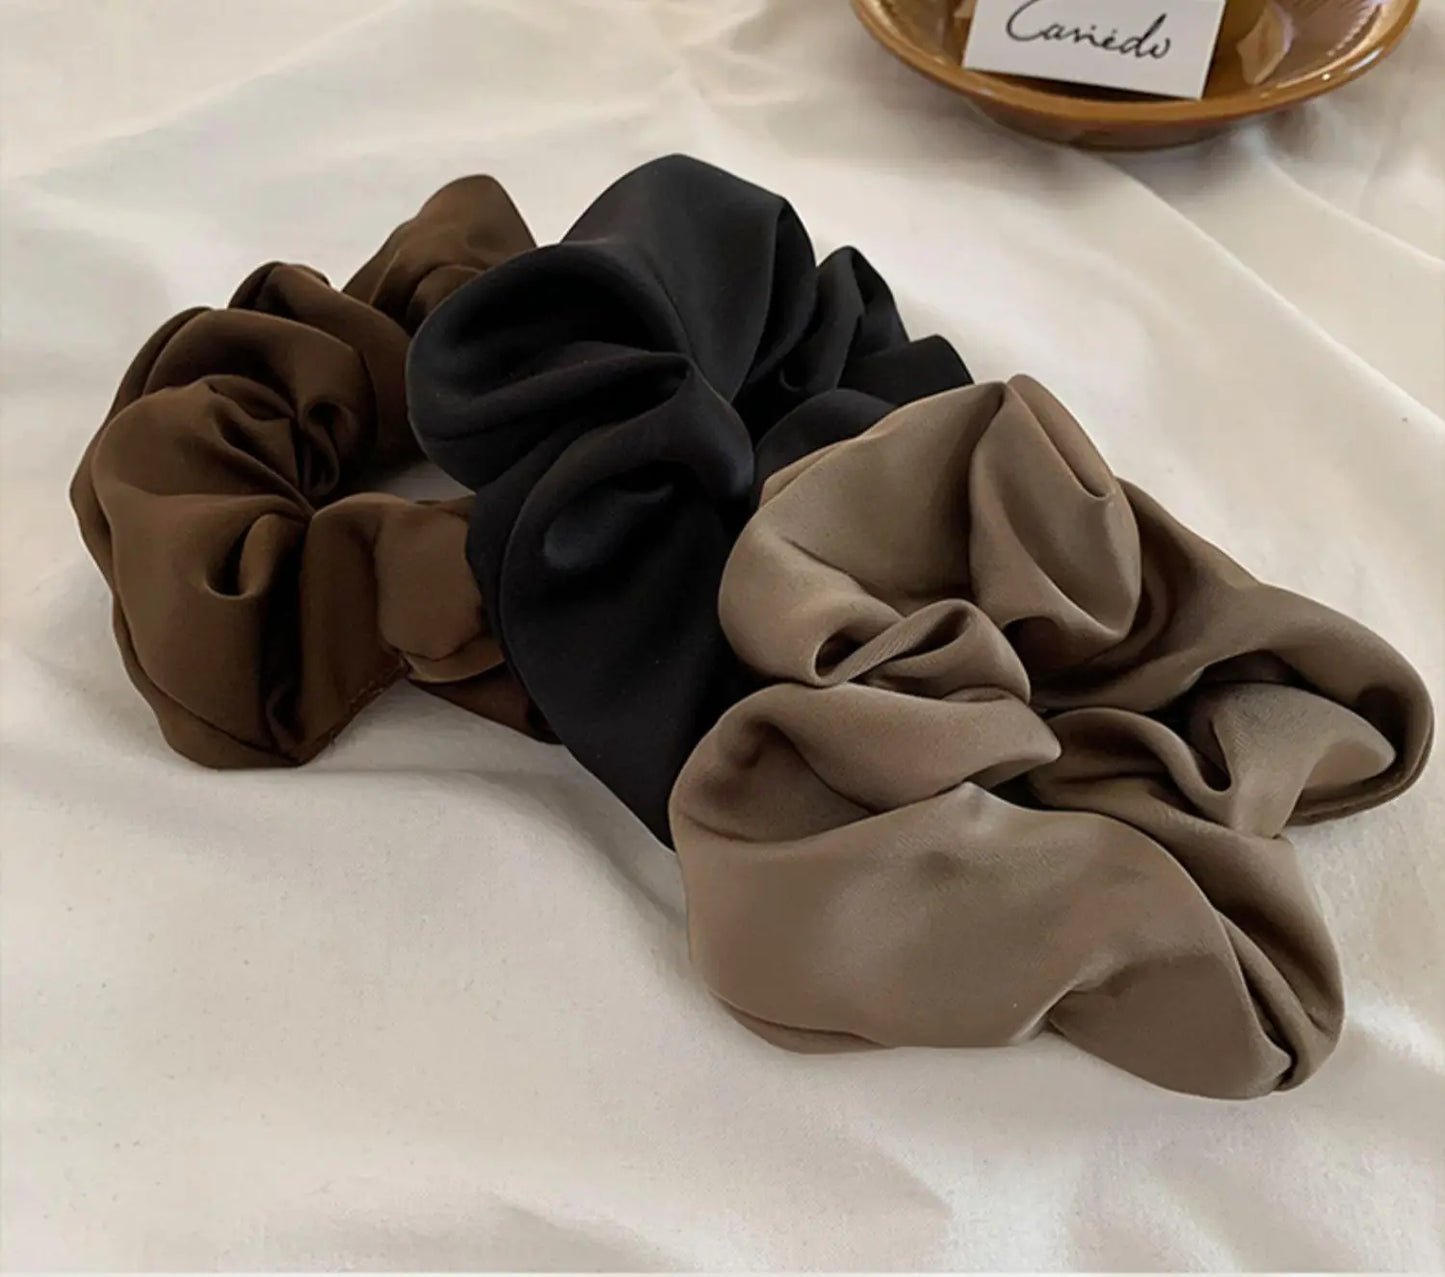 Large Silky Scrunchies